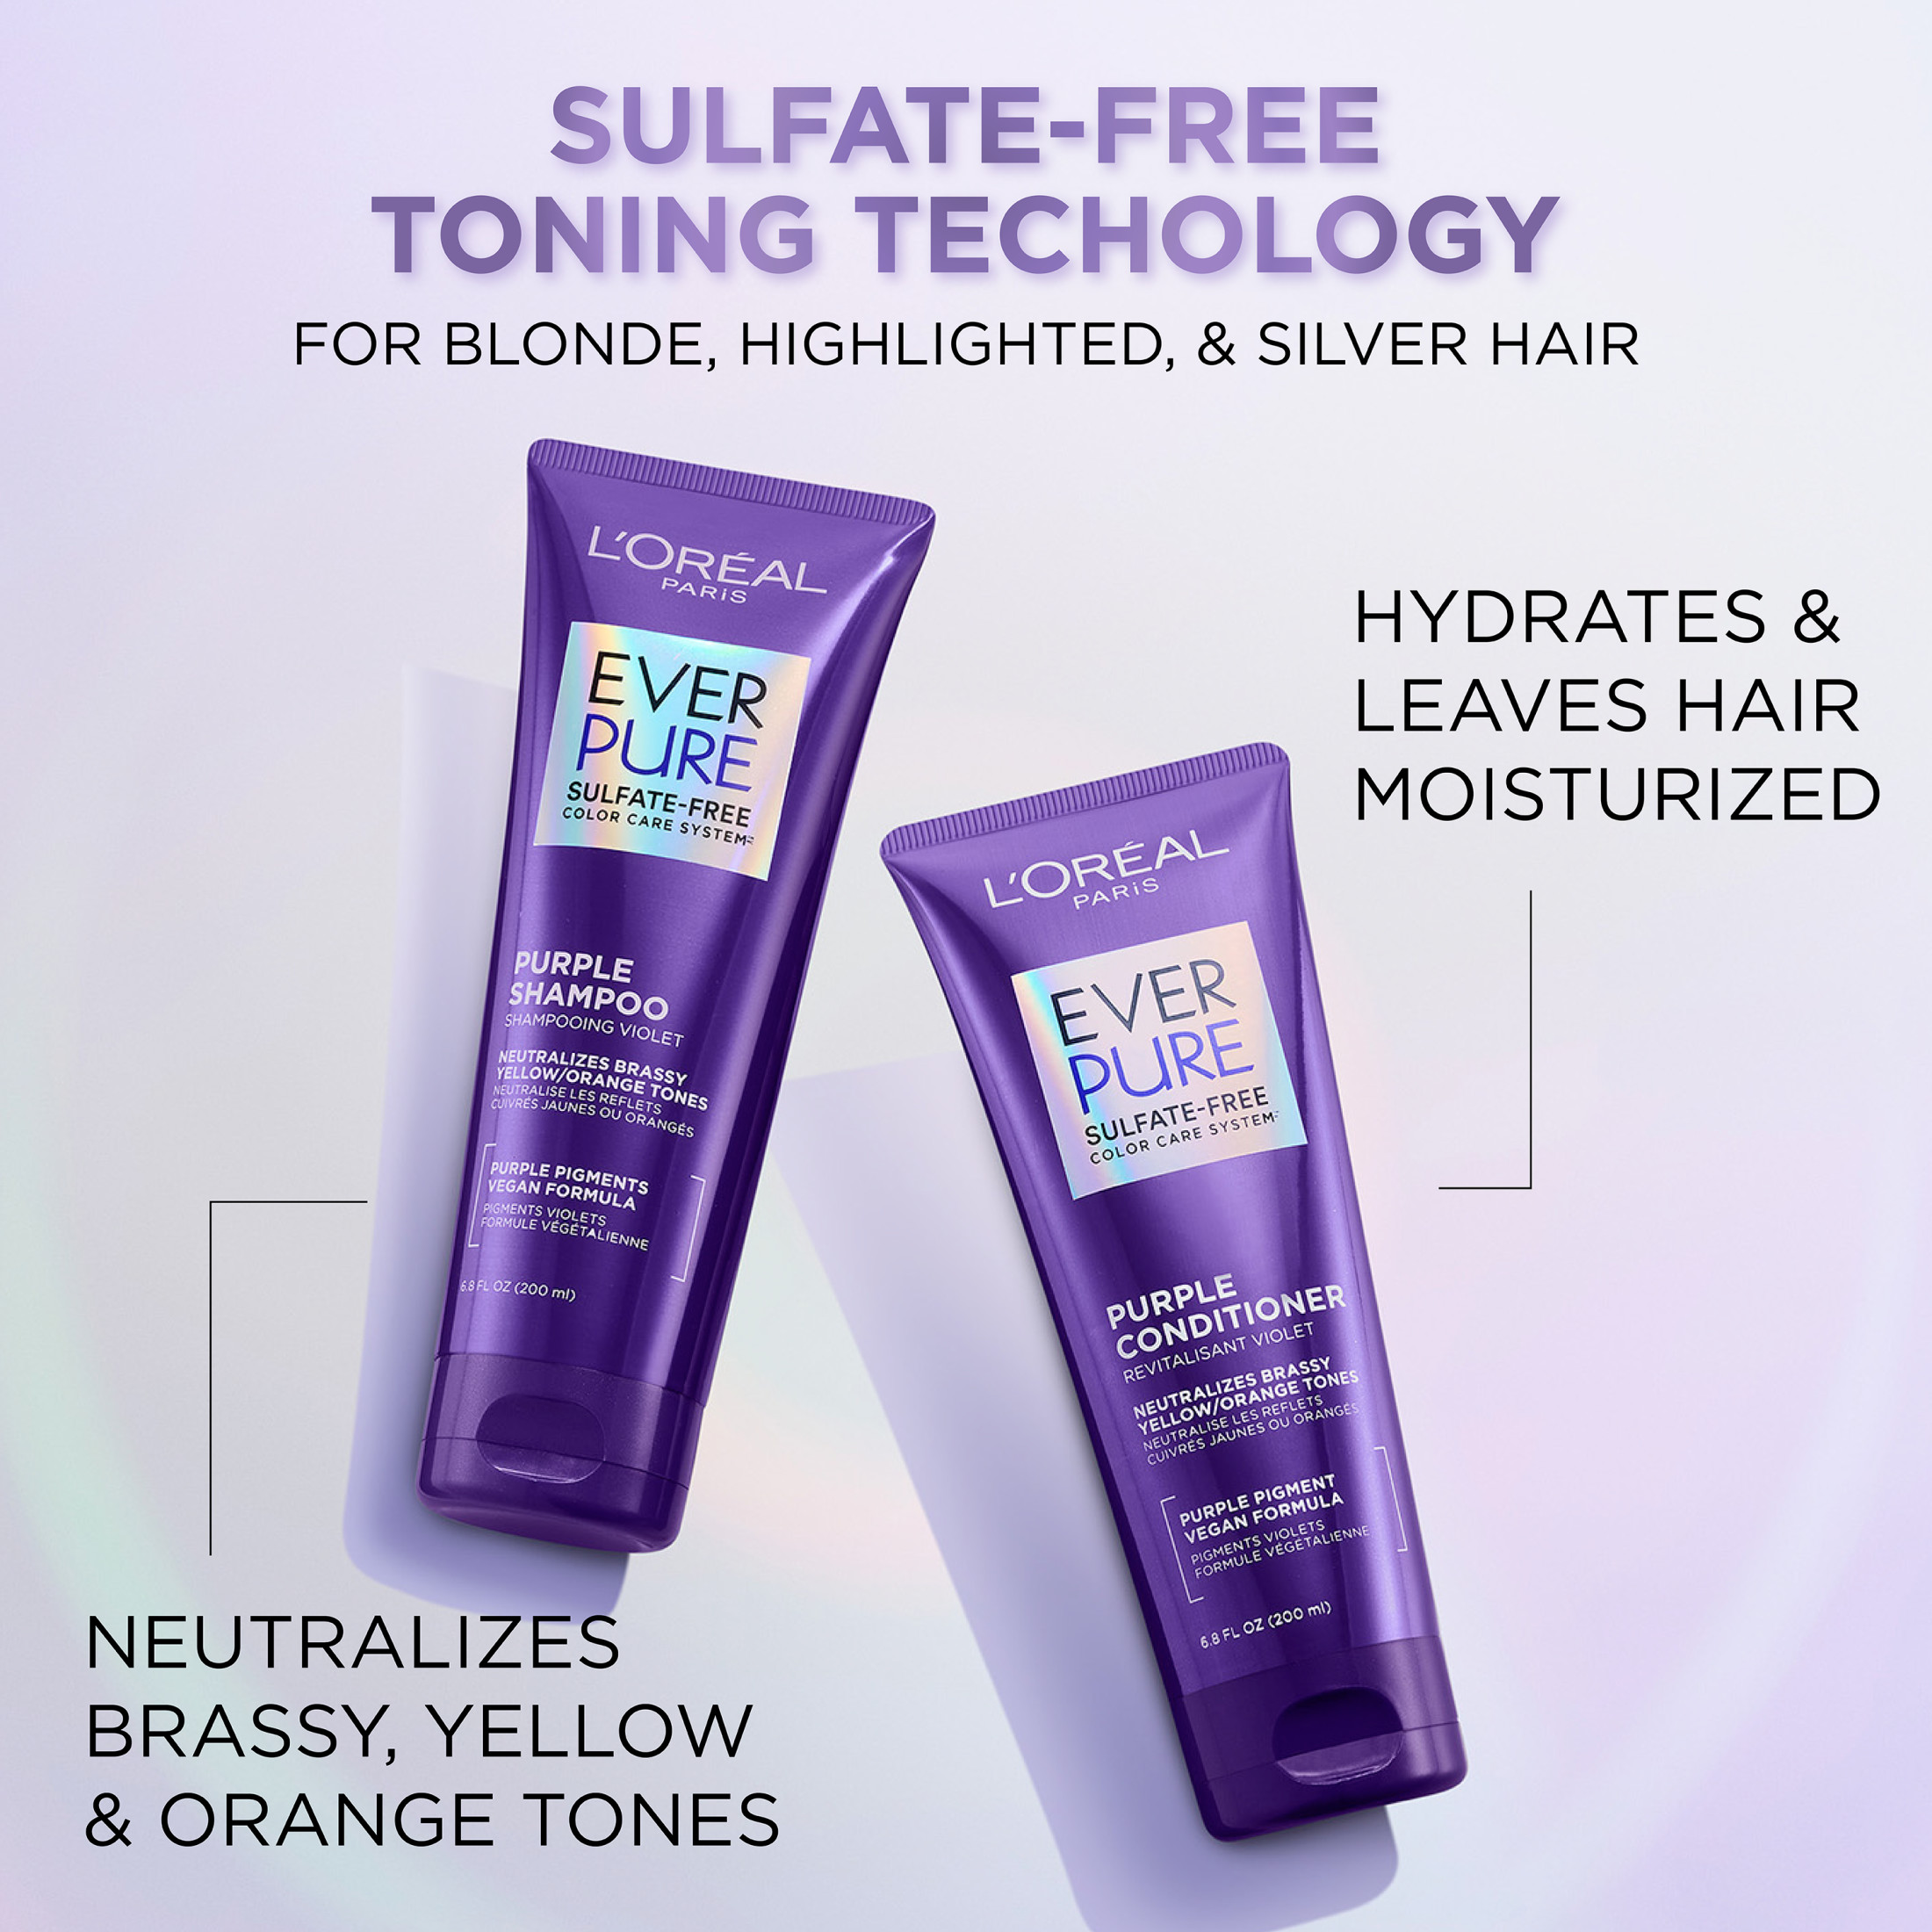 L'Oreal Paris Sulfate Free Purple Shampoo for Toning Blonde and Bleached Hair, EverPure 6.8 fl oz - image 3 of 11